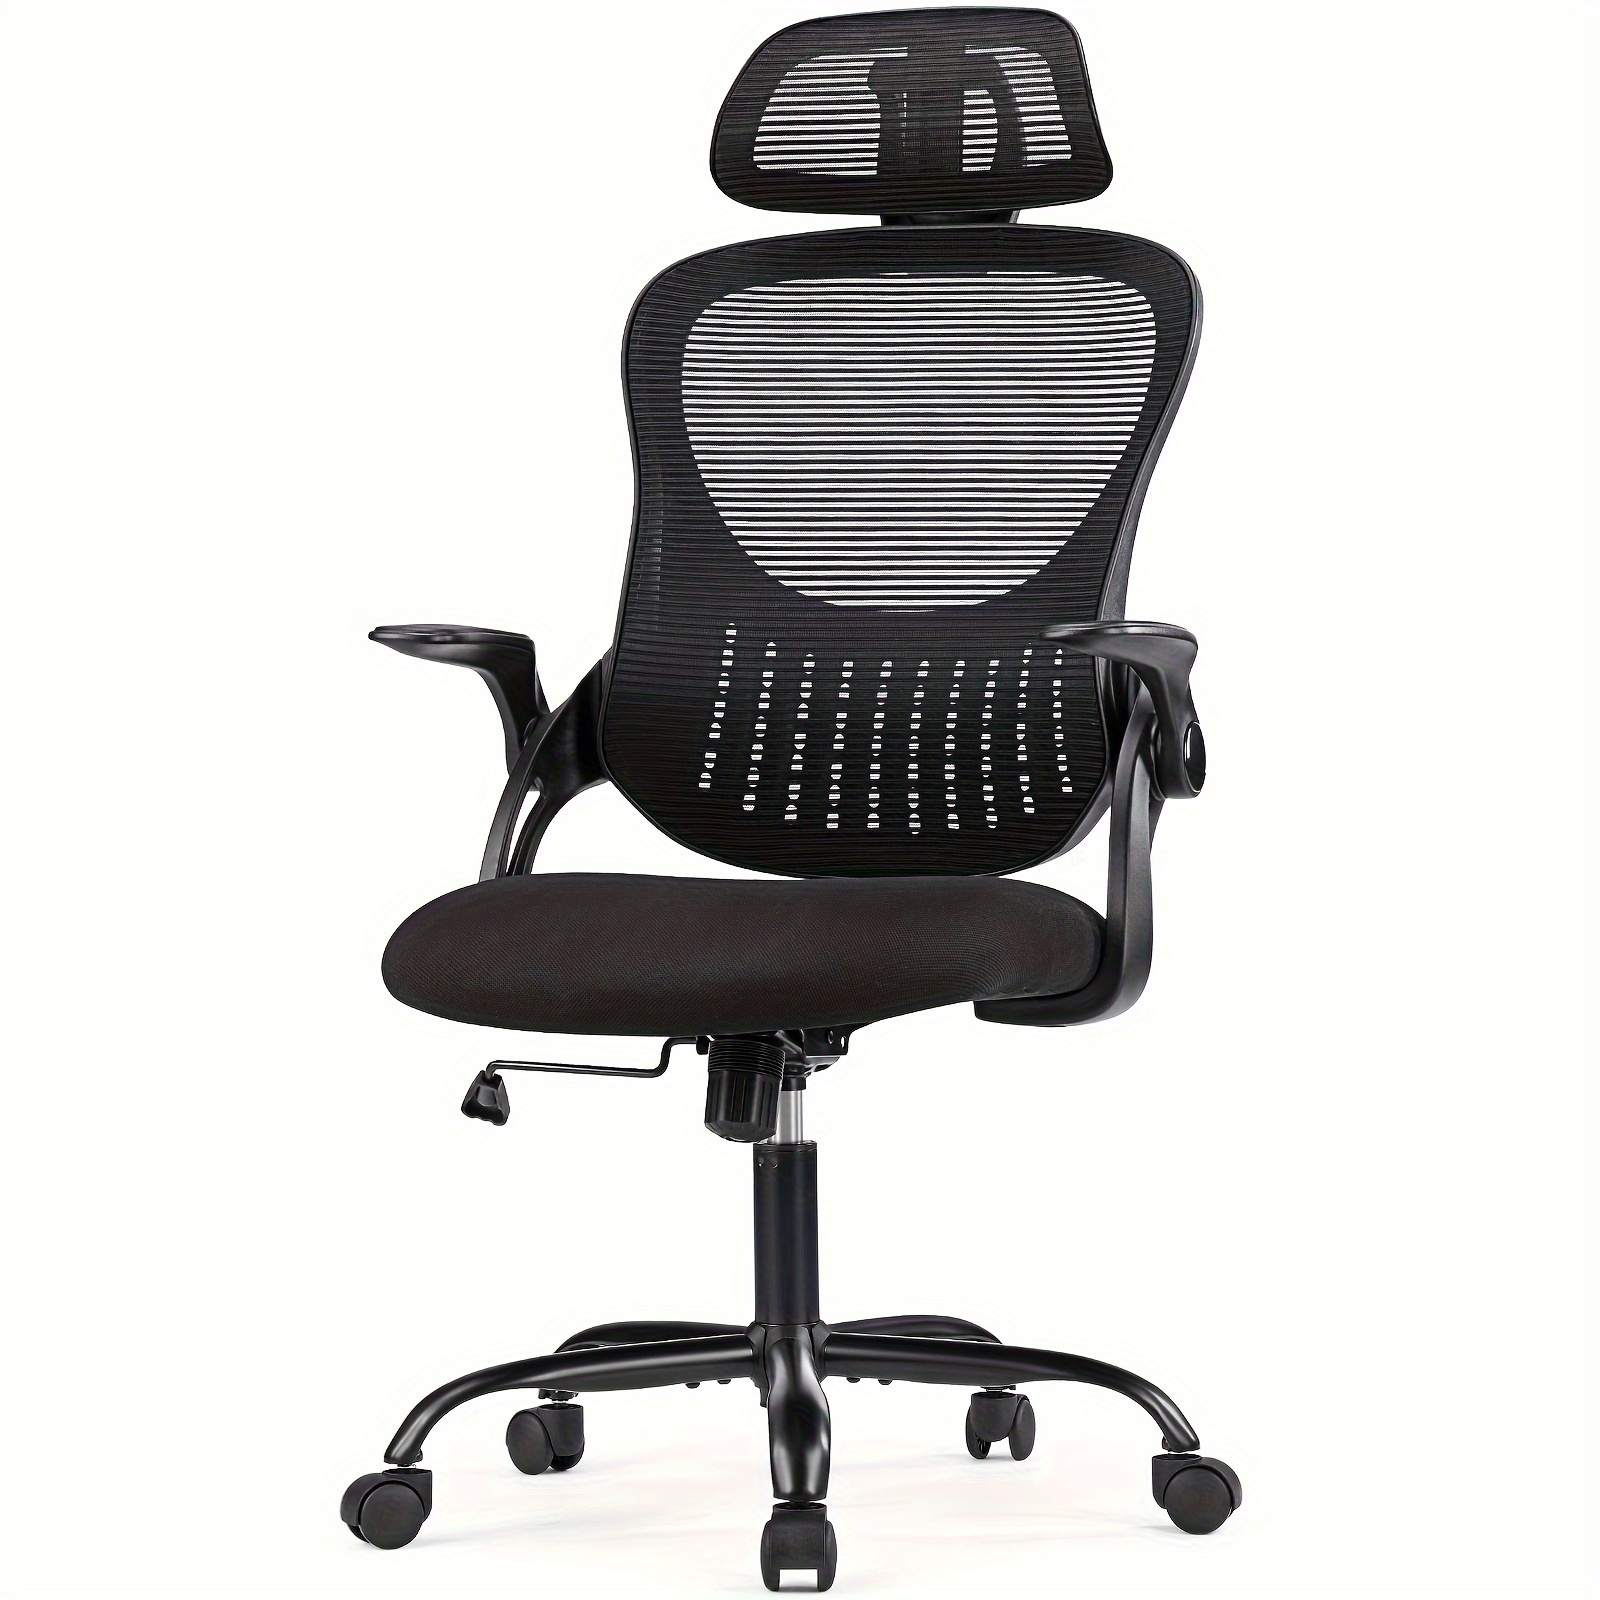 

Home Office Desk Chair, Ergonomic High-back Mesh Rolling Work Computer Chairs With Wheels And Adjustable Headrests, Comfortable Lumbar Support, Comfy Flip-up Arms For Bedroom, Study